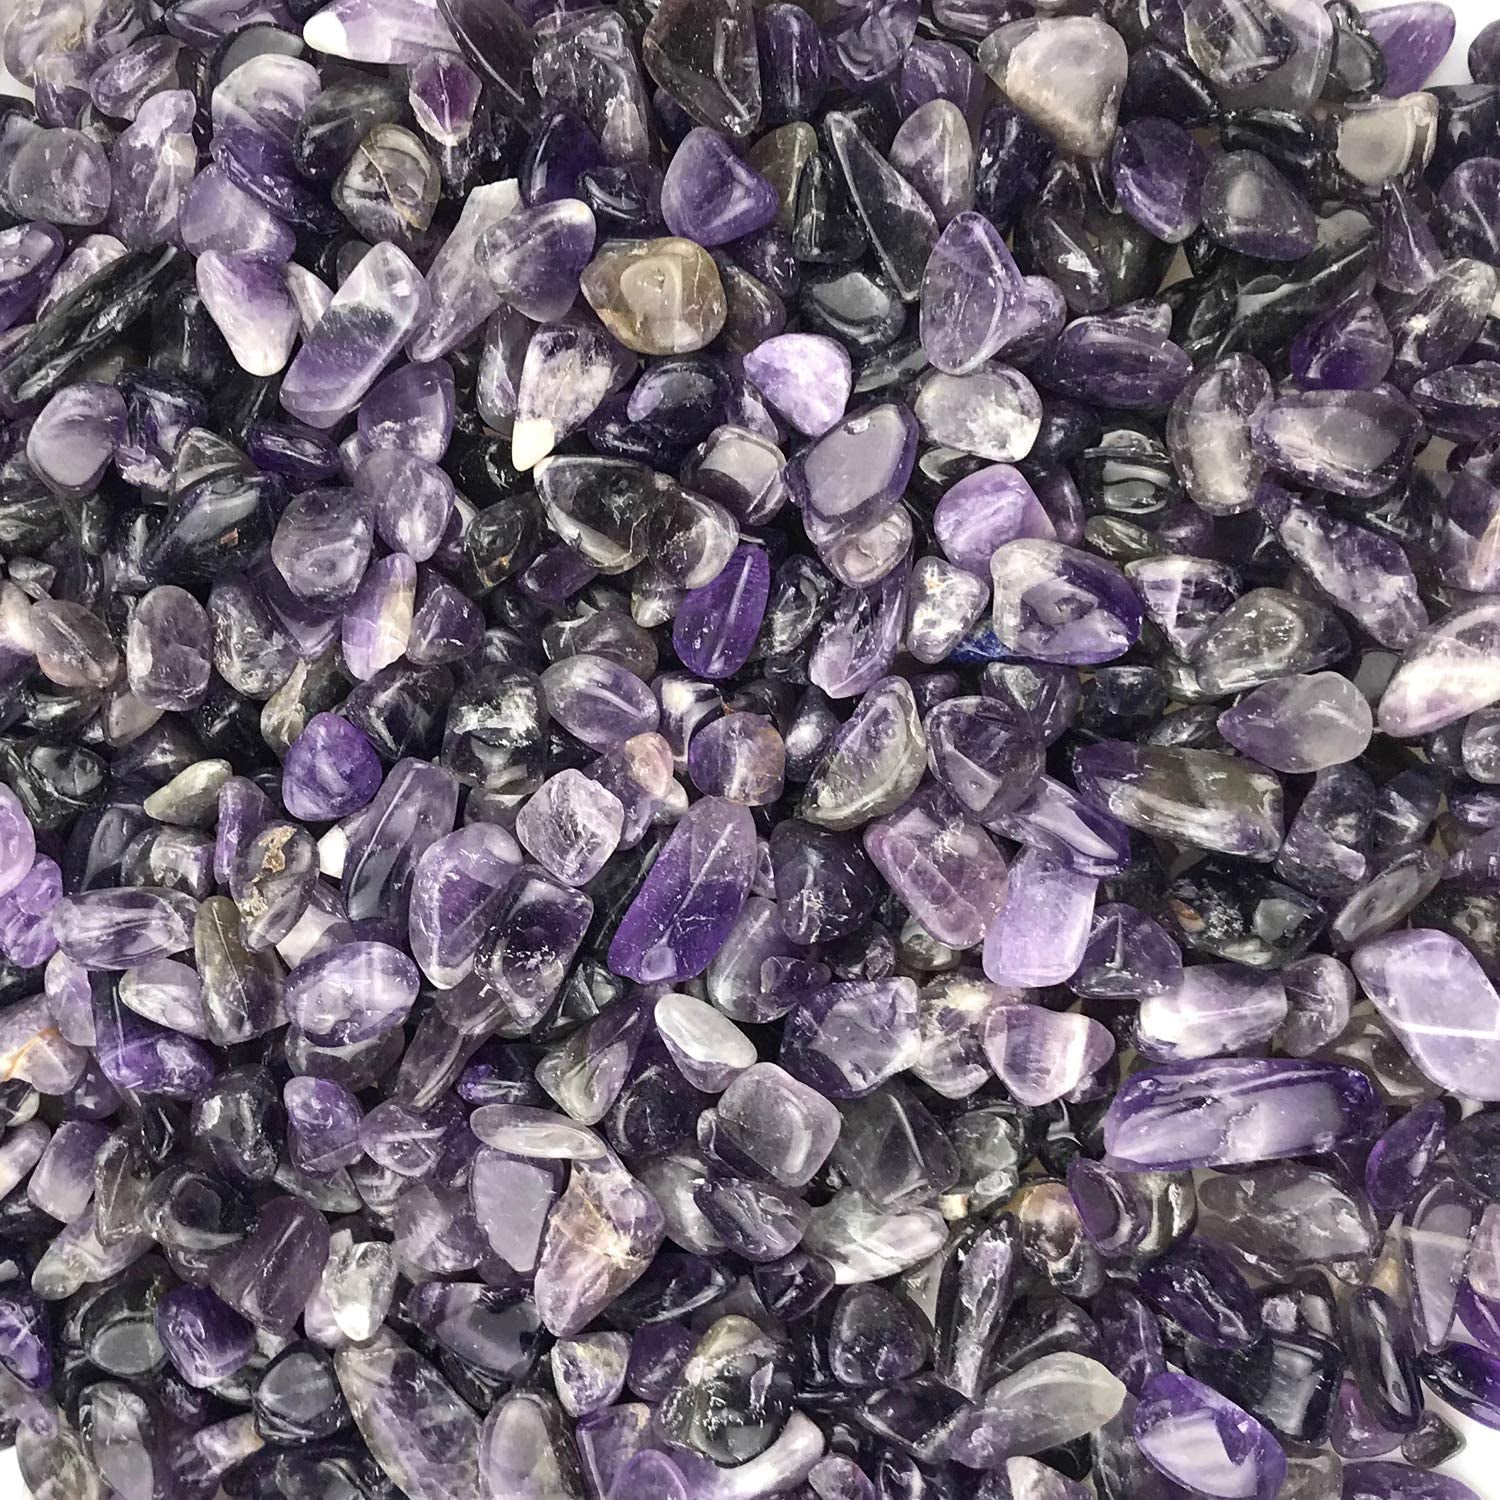 SNAKTOPIA, SNAKTOPIA Amethyst Small Tumbled Chips Stone Gemstone Chips Crushed Pieces Irregular Shaped Stones Crystal Chips Stone Perfect for Jewelry Making Home Decoration 0.2~0.5In Weight 0.74 Ib (3-Amethyst)